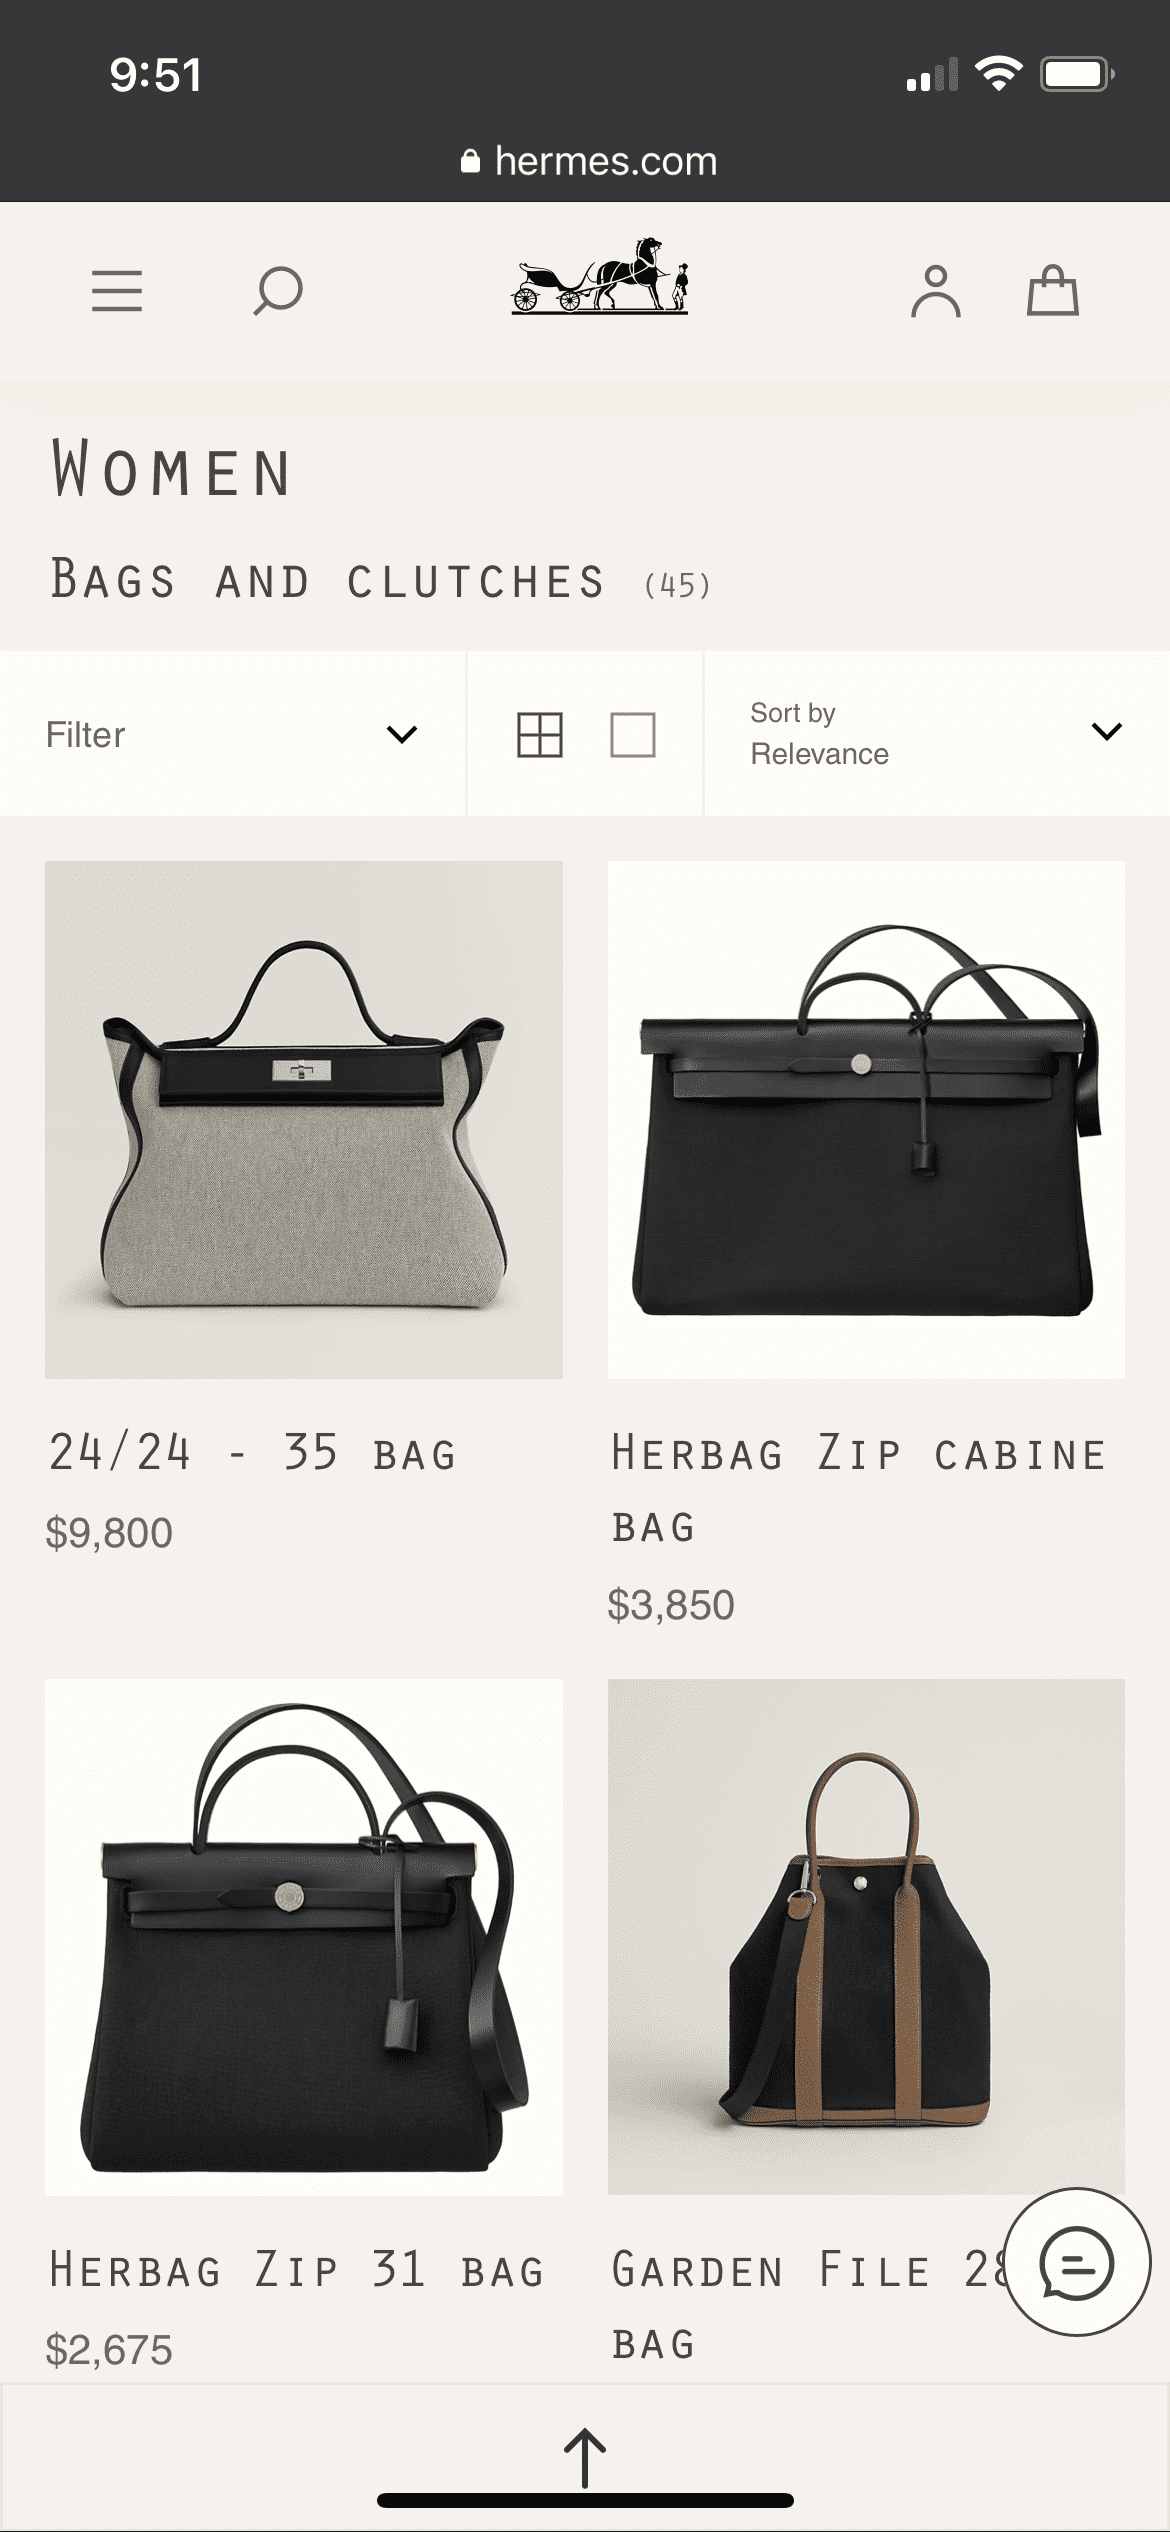 What Bags do they sell on the Hermes Website